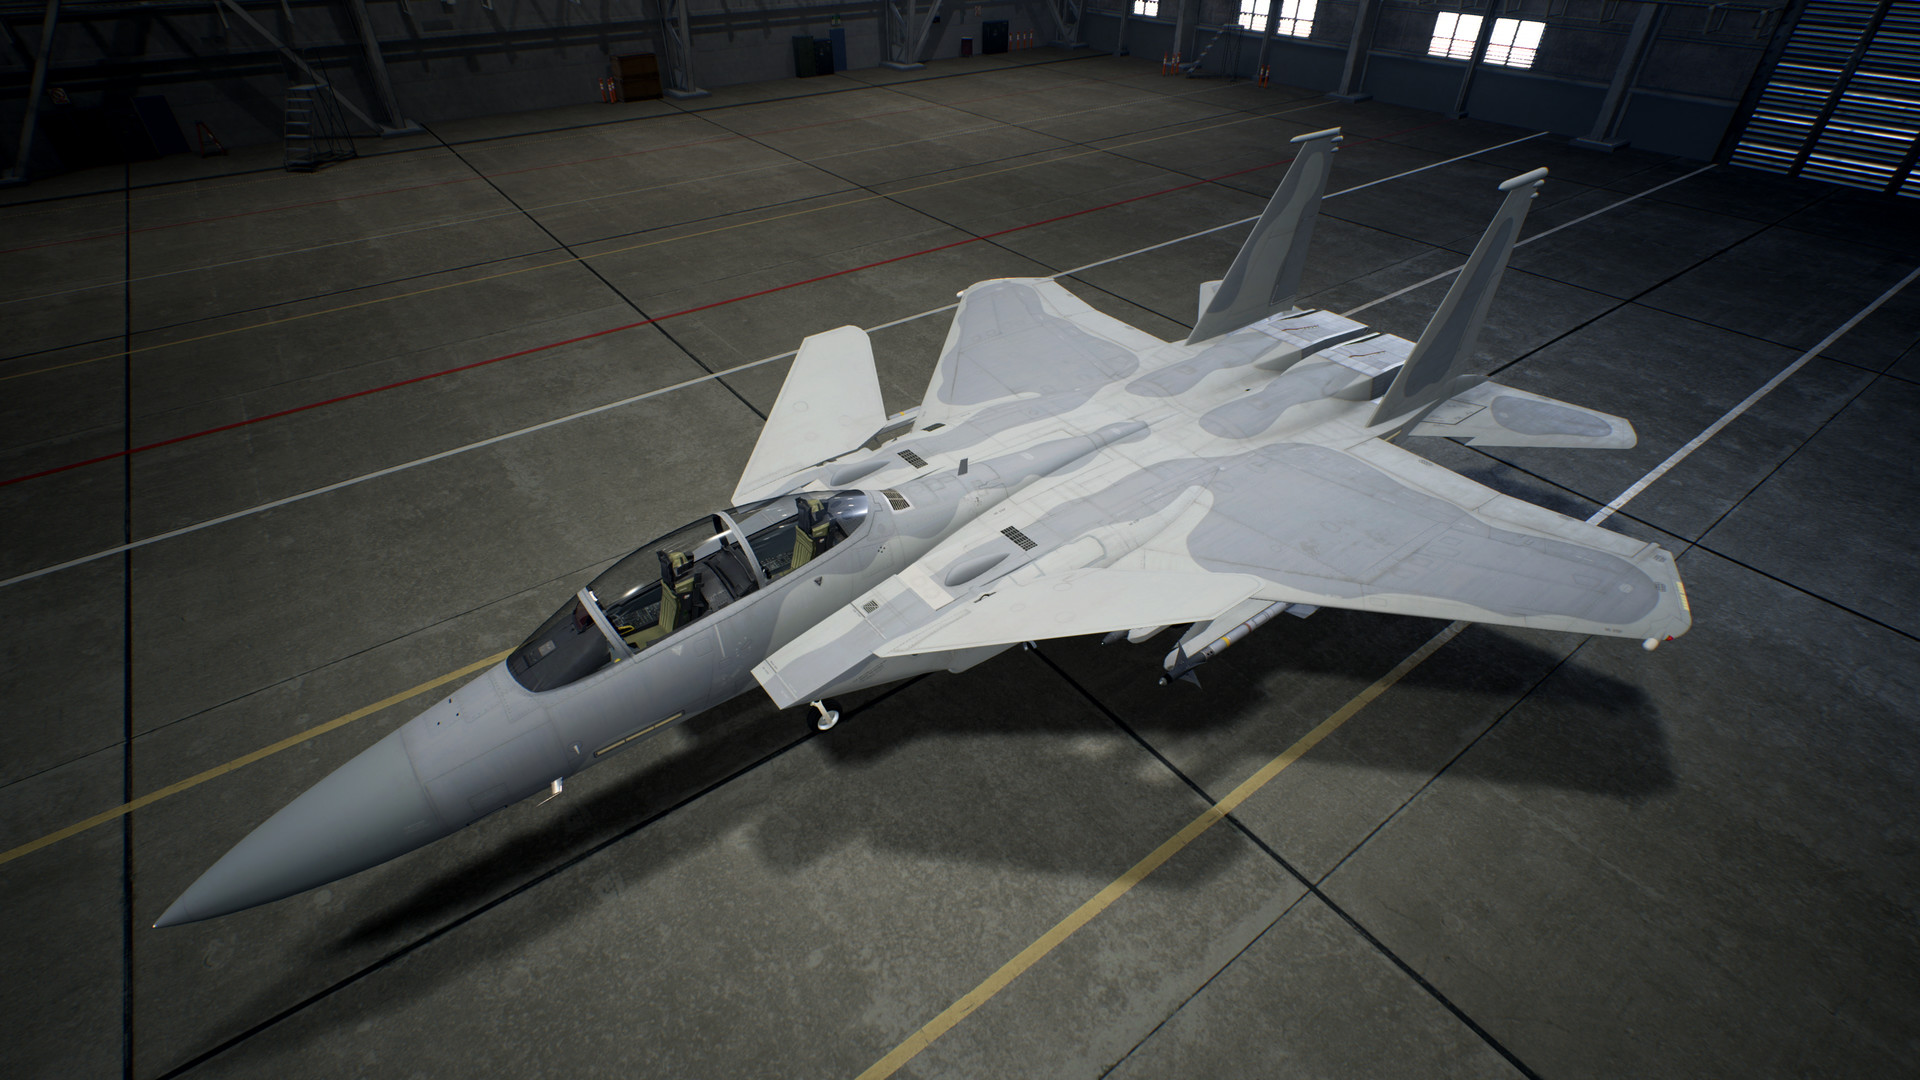 Ace Combat 7 Experimental Aircraft DLC Arrives in Spring 2021